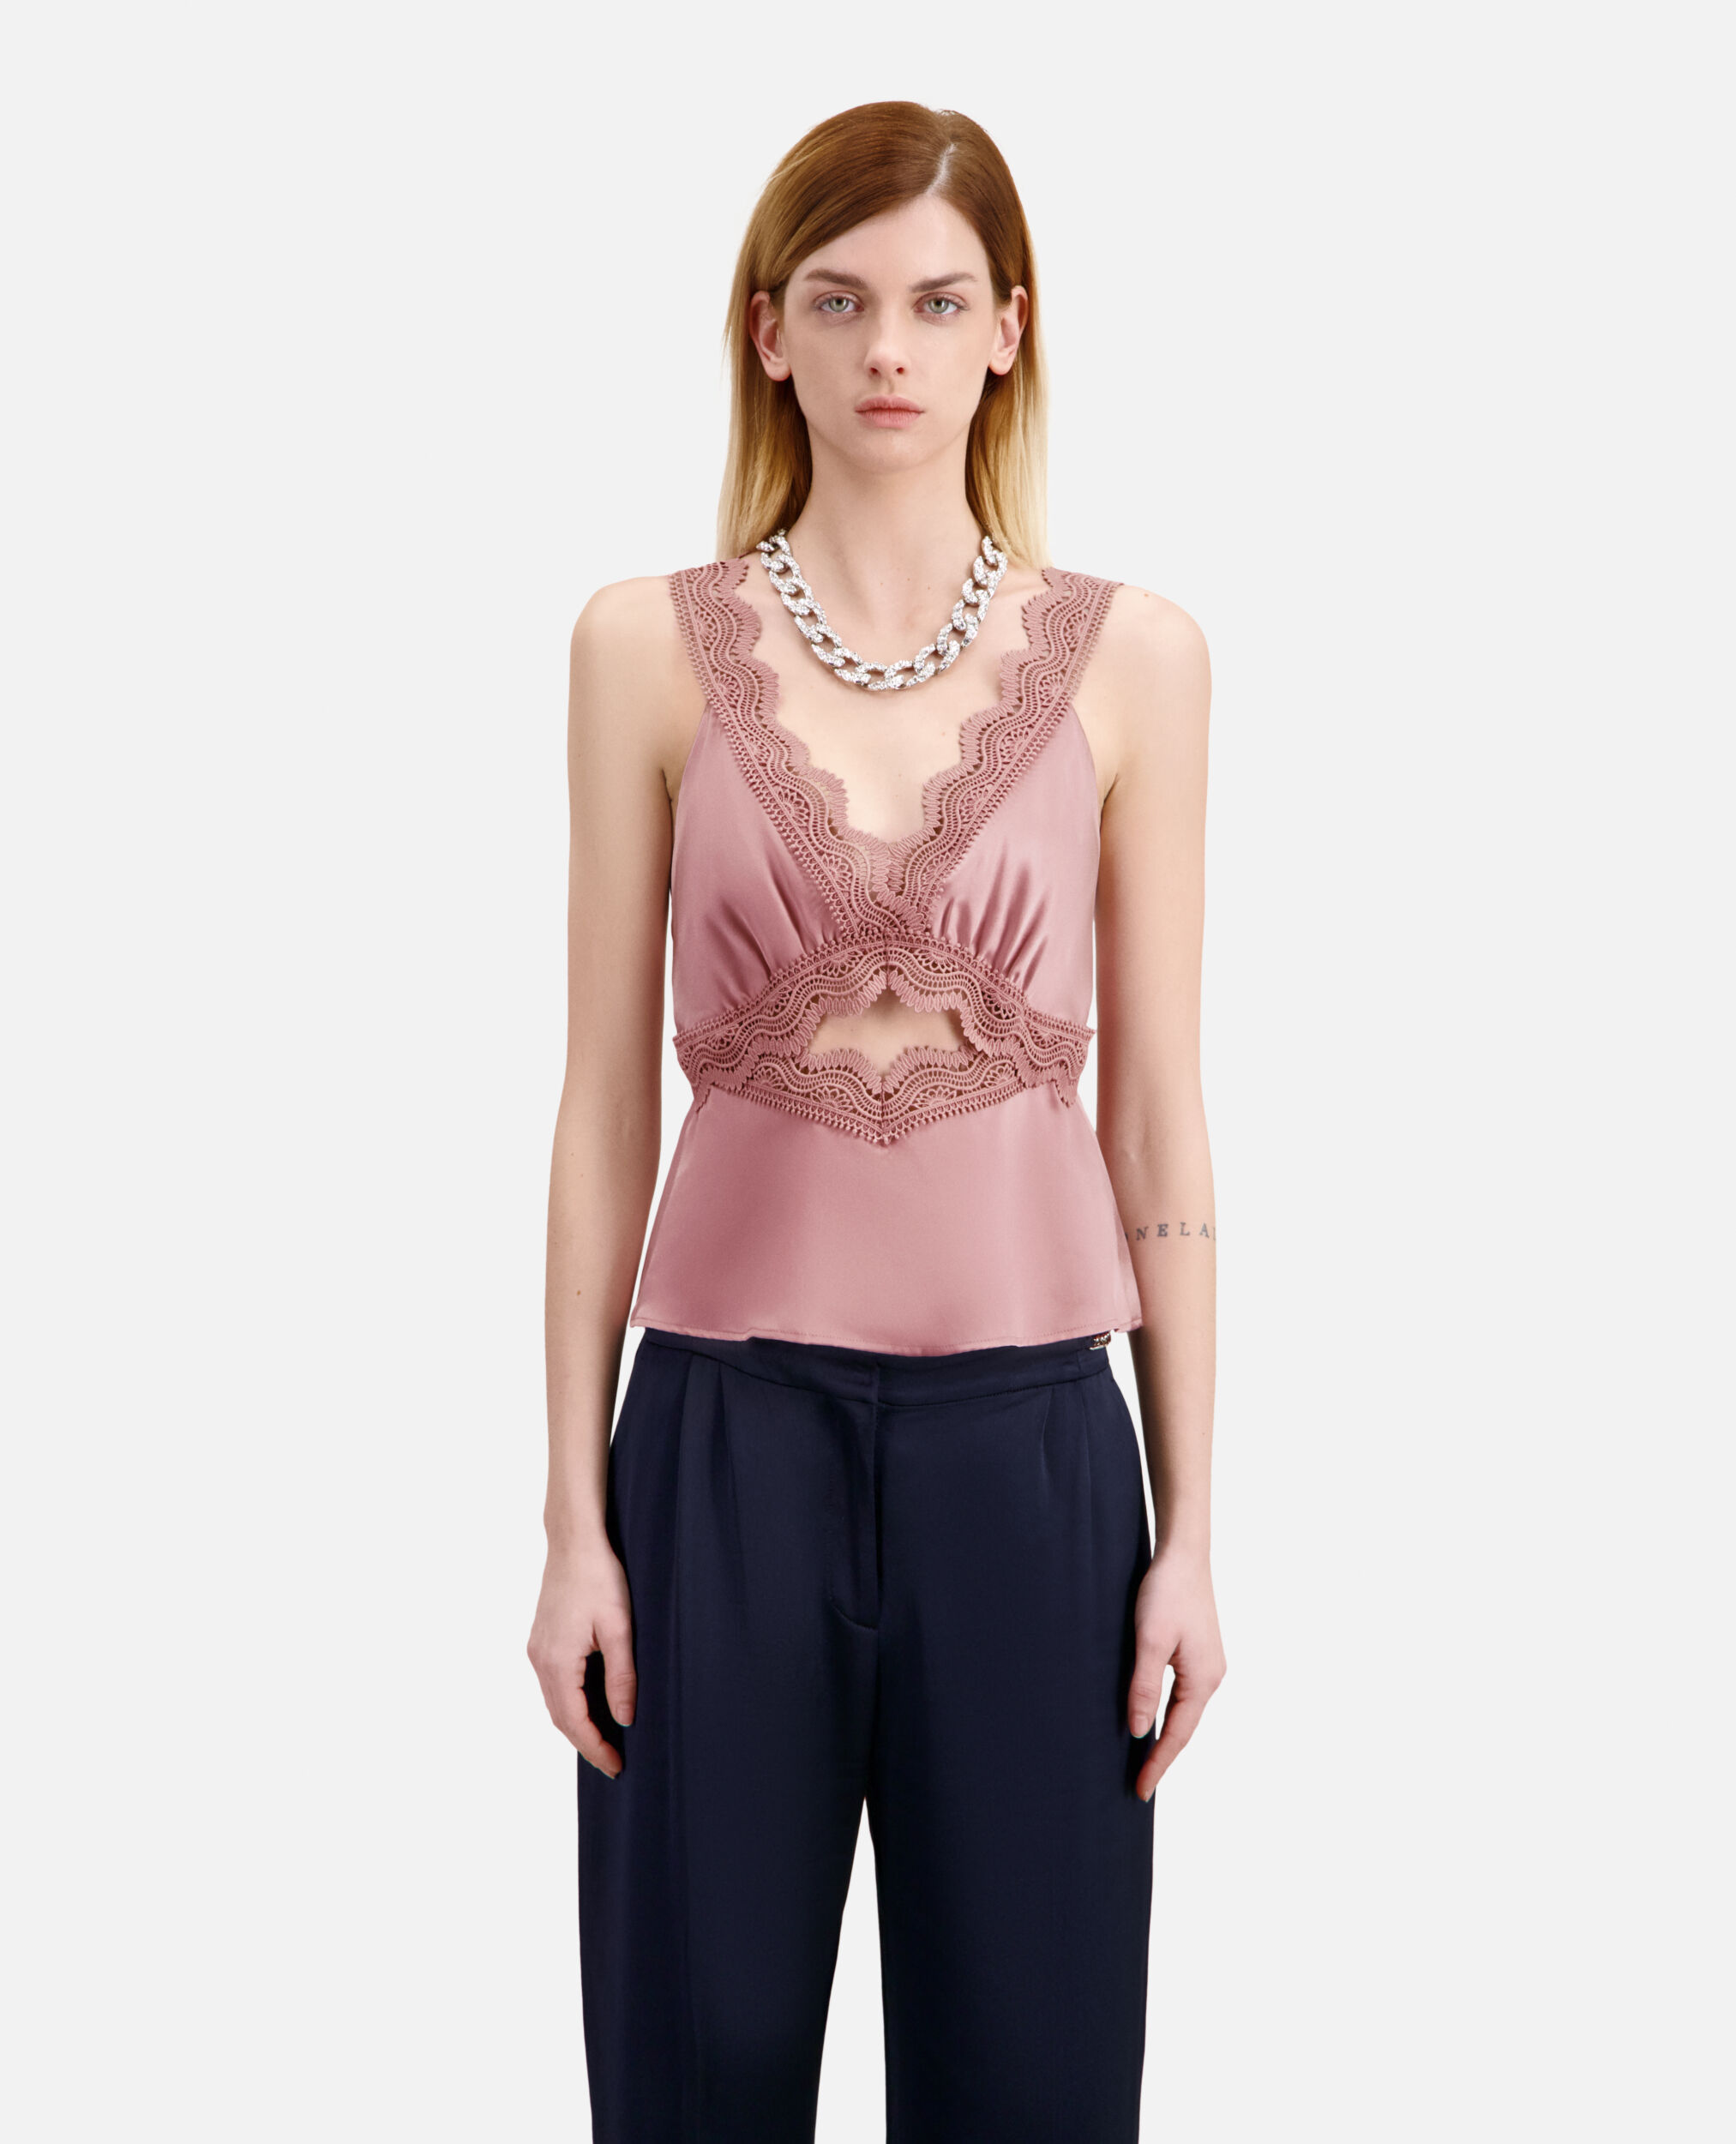 Lila Top mit Guipure-Details, PINK WOOD, hi-res image number null